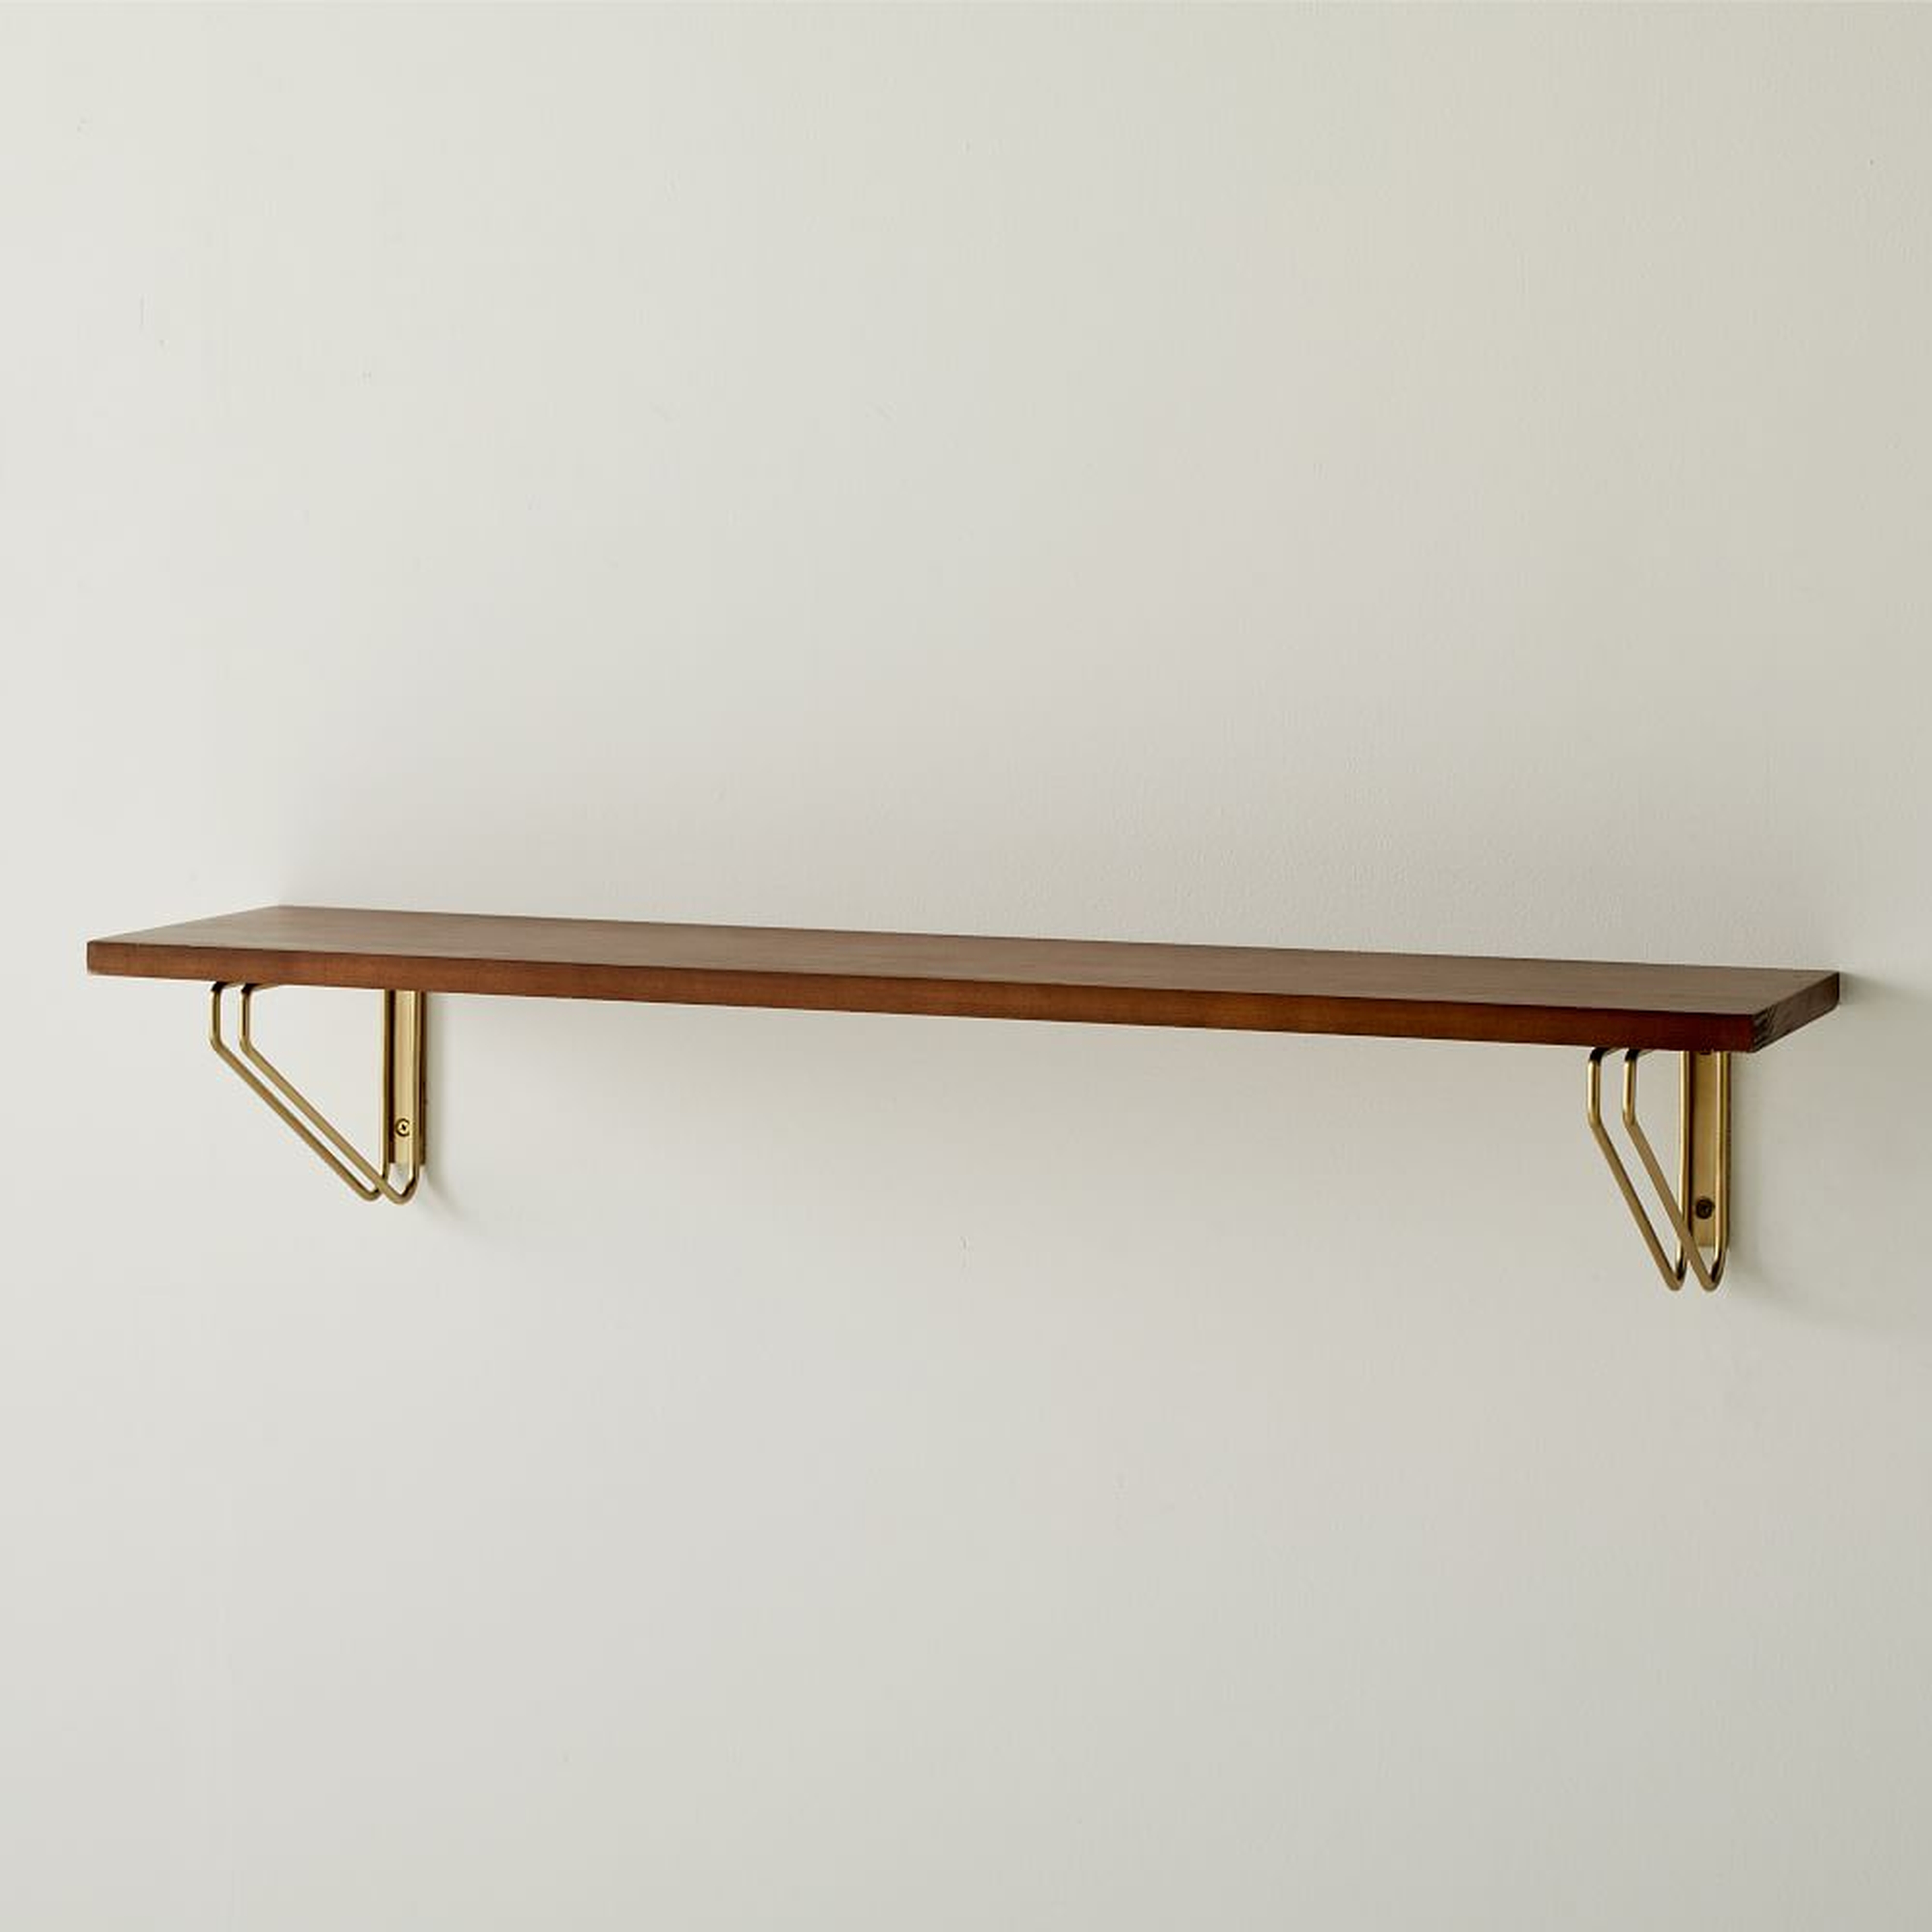 Linear Cool Walnut Wood Wall Shelves with Parallel Brackets - West Elm